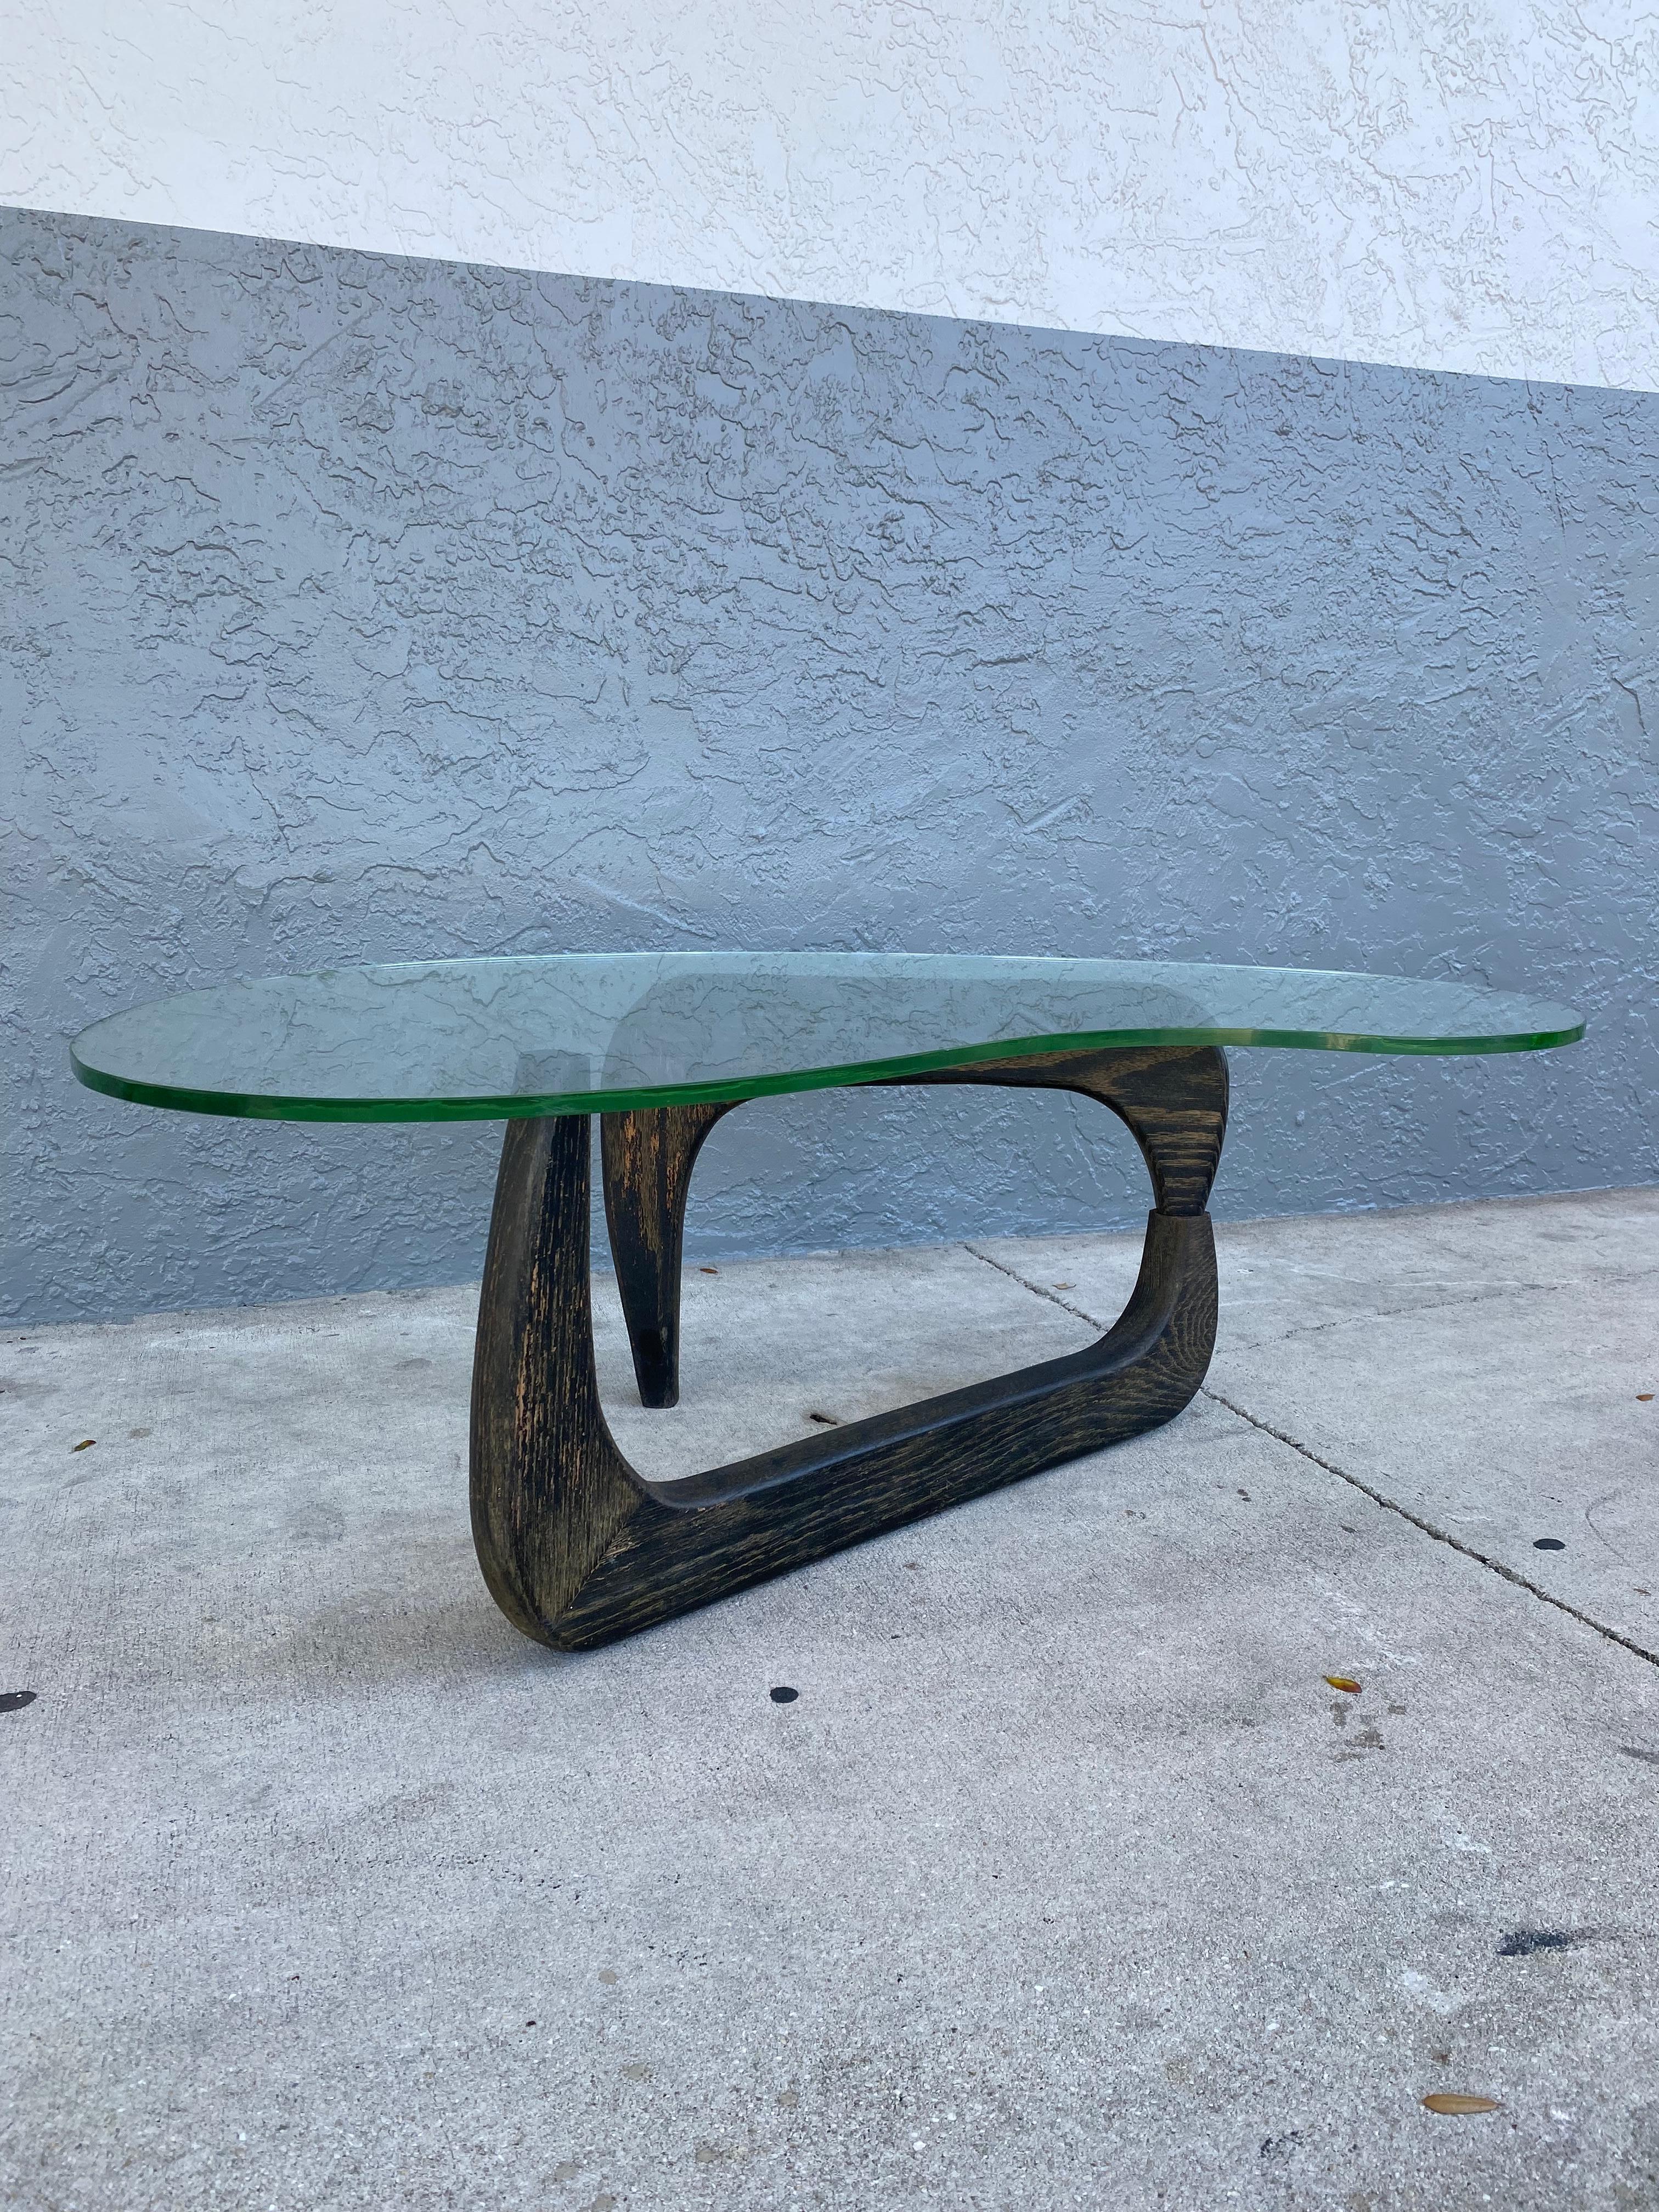 This iconic original glass kidney table is packed with personality! Outstanding design is exhibited throughout. Just look at the gorgeous details on this beauty! Vintage 1950s, Mid-Century Modern, Cerused oak kidney shape coffee table in the Isamu